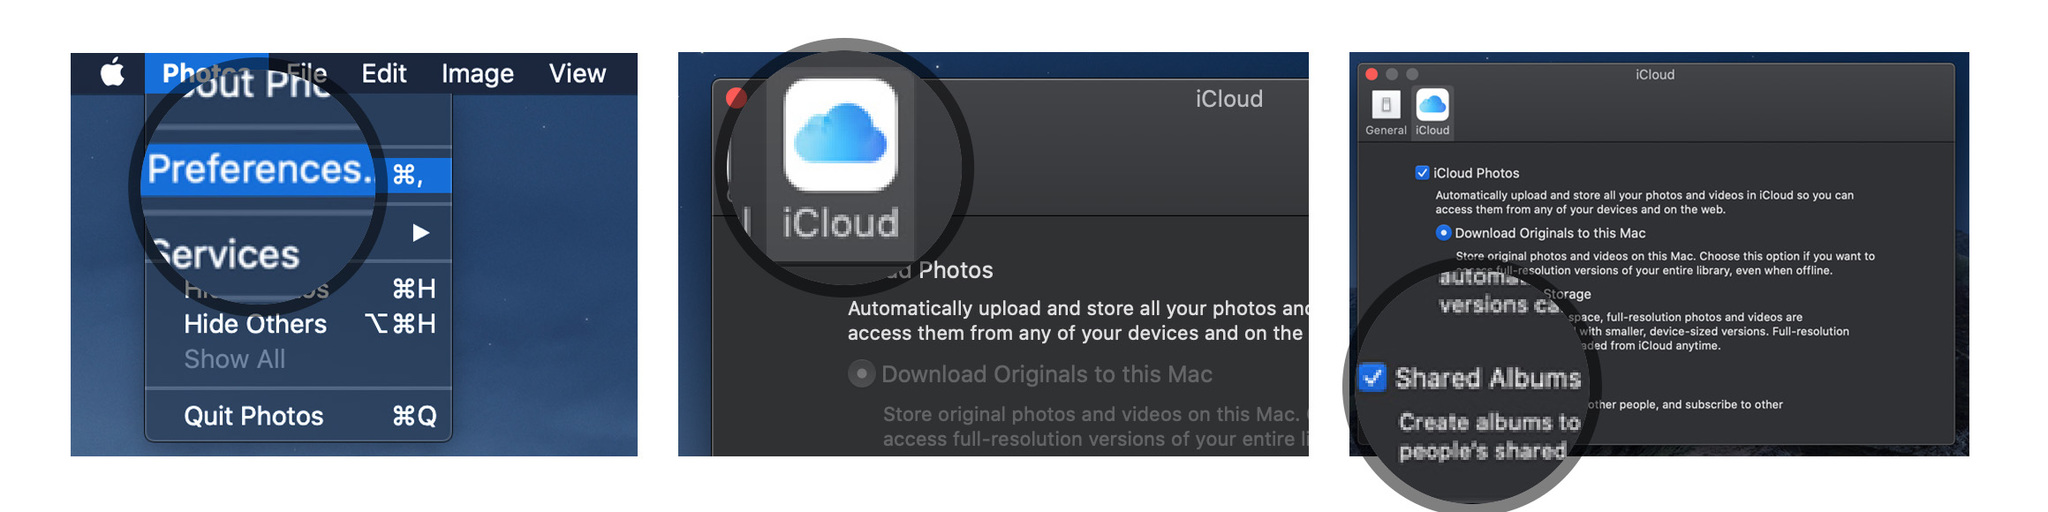 Enable iCloud Photos on Mac by showing steps Launch the Photos app on your Mac, Select Photos from the app menu in the upper left corner, Select Preferences from the drop down menu, Select the iCloud tab, Tick the box for iCloud Photos, Tick the box for Shared Albums.